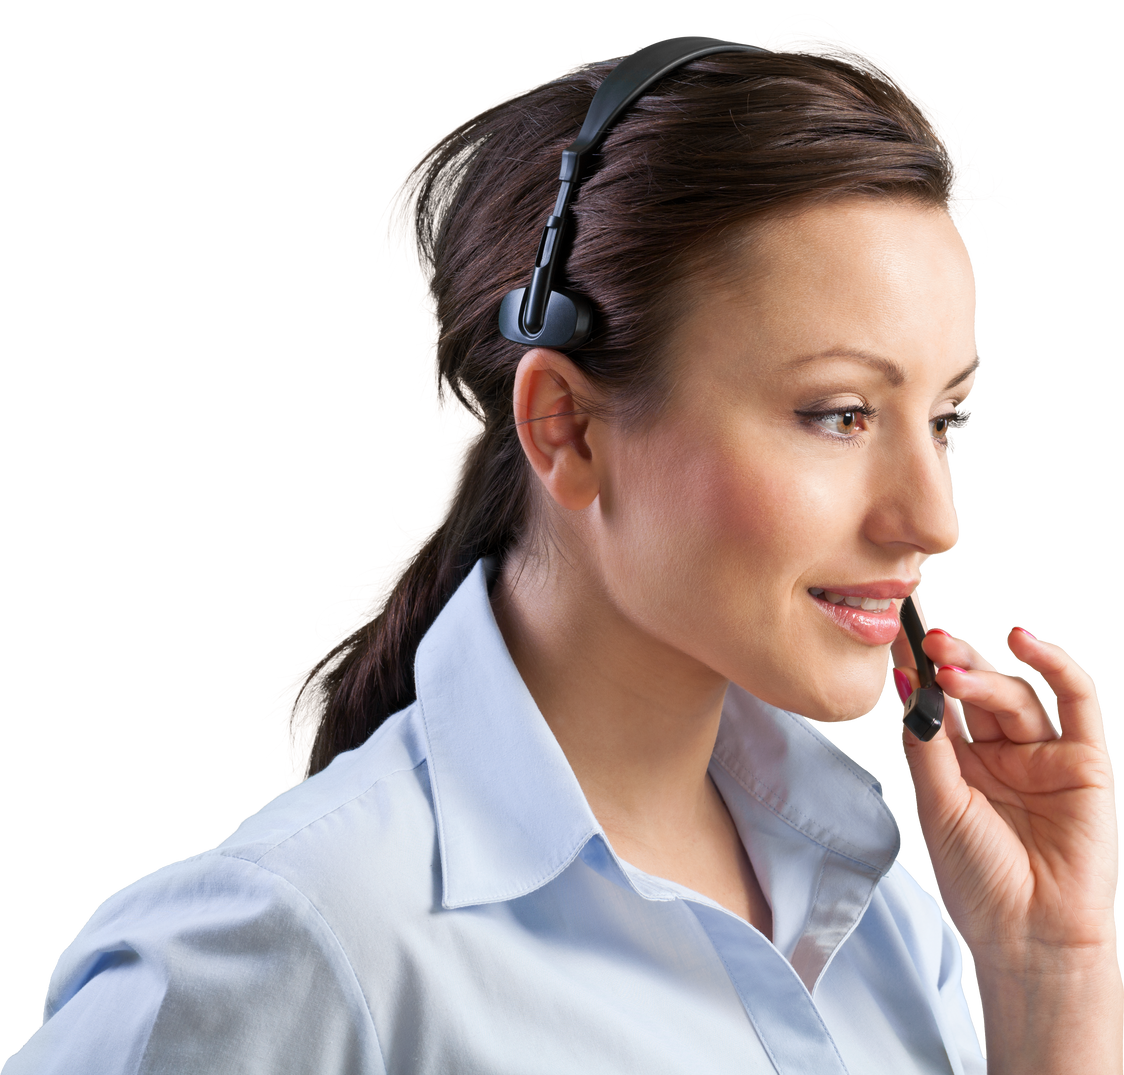 Call Center Operator Business Woman, Isolated